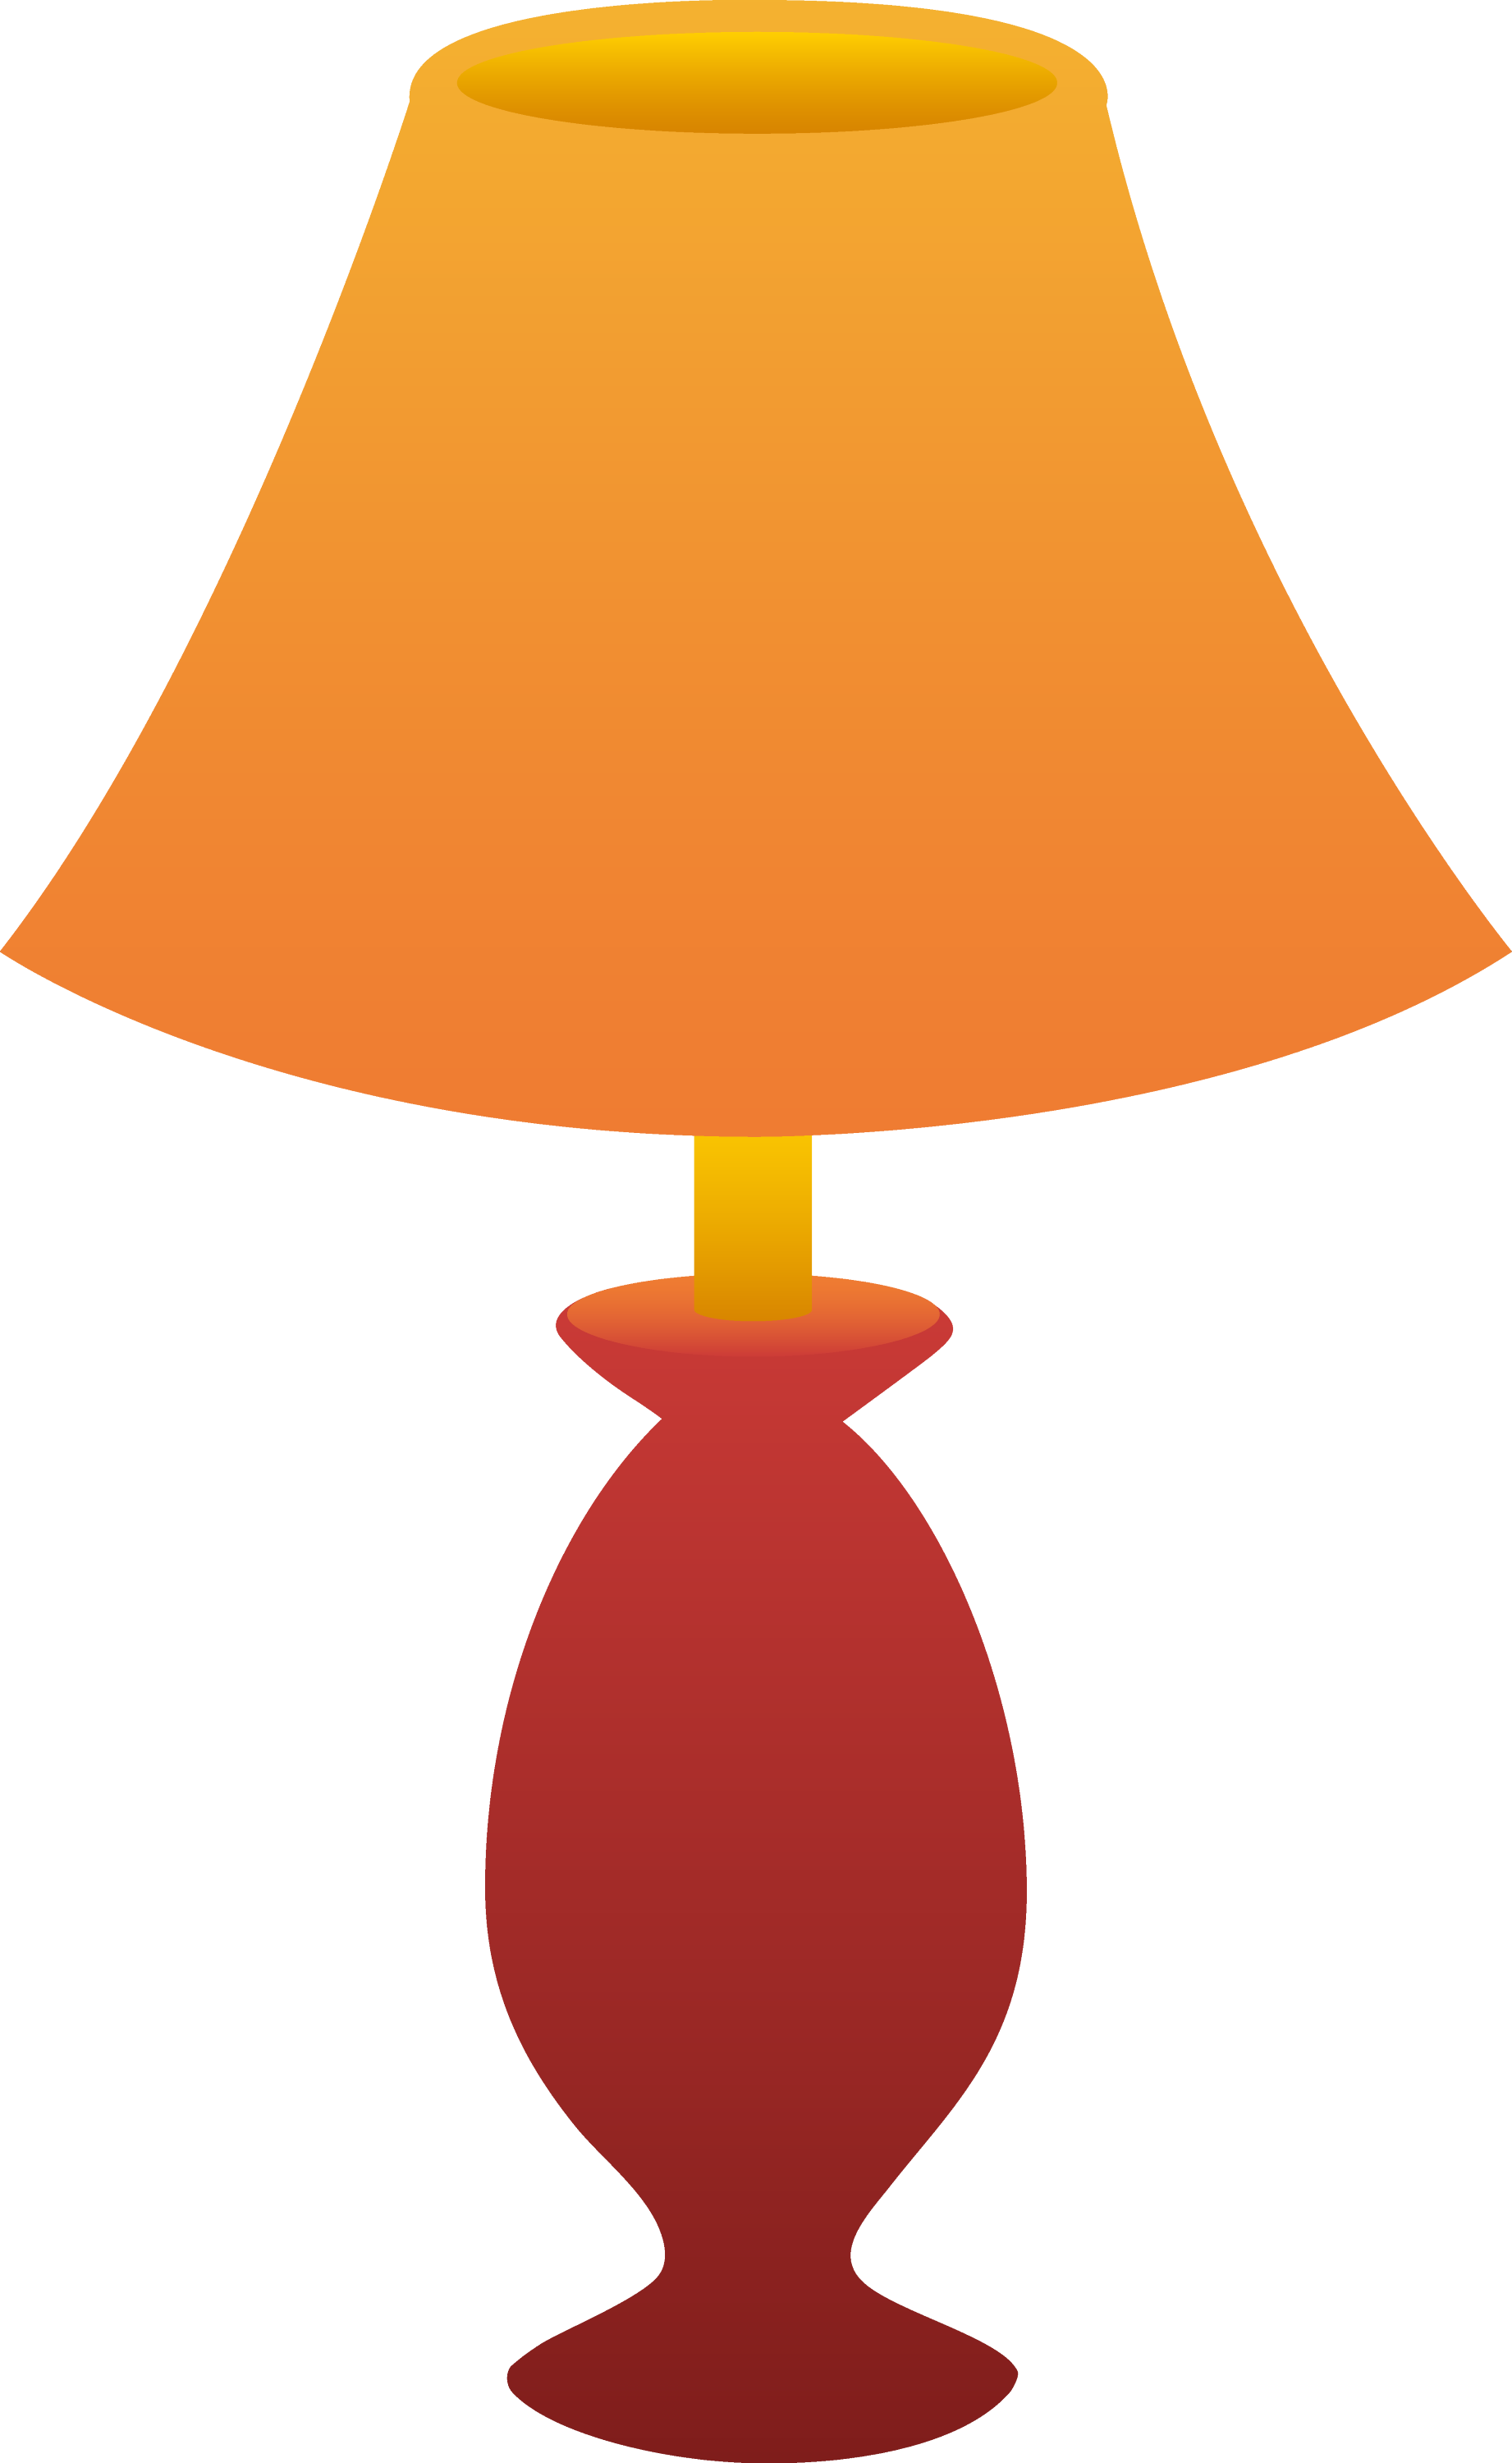 (http://sweetclipart.com/multisite/sweetclipart/files/lamp_red_beige.png)